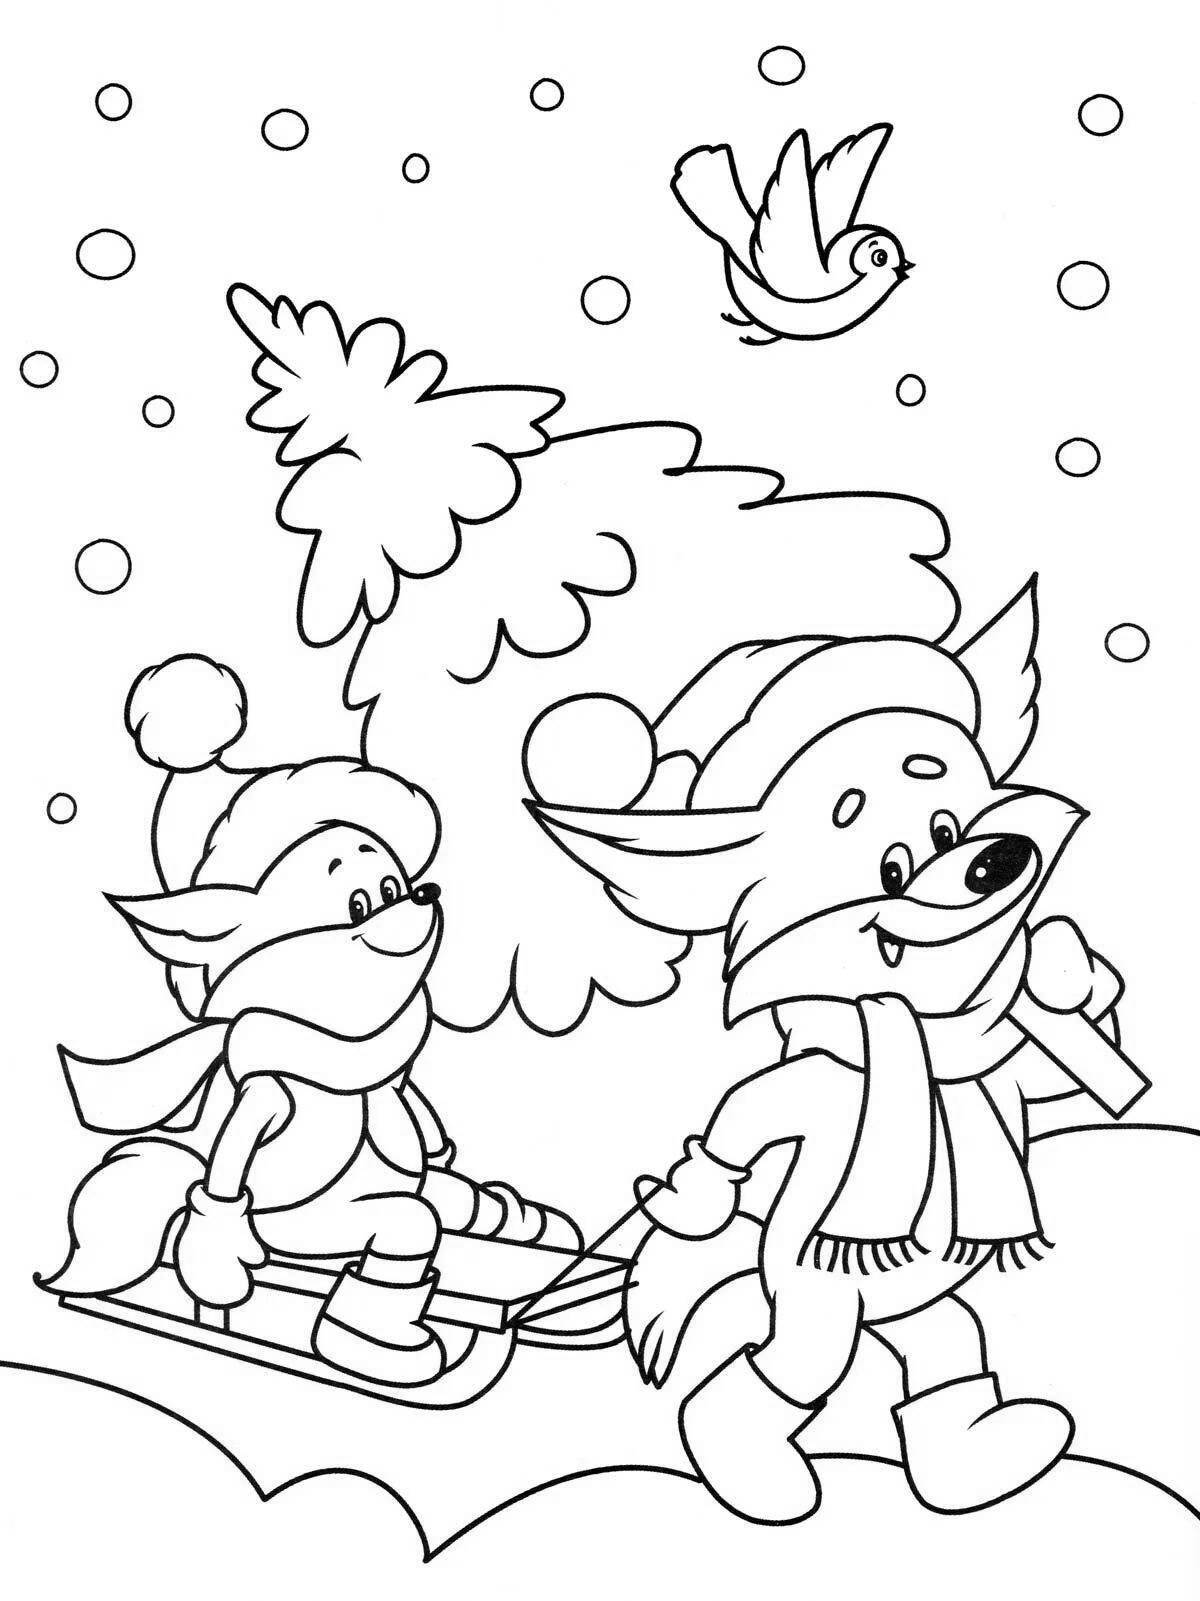 Great winter coloring book for kids 4 5